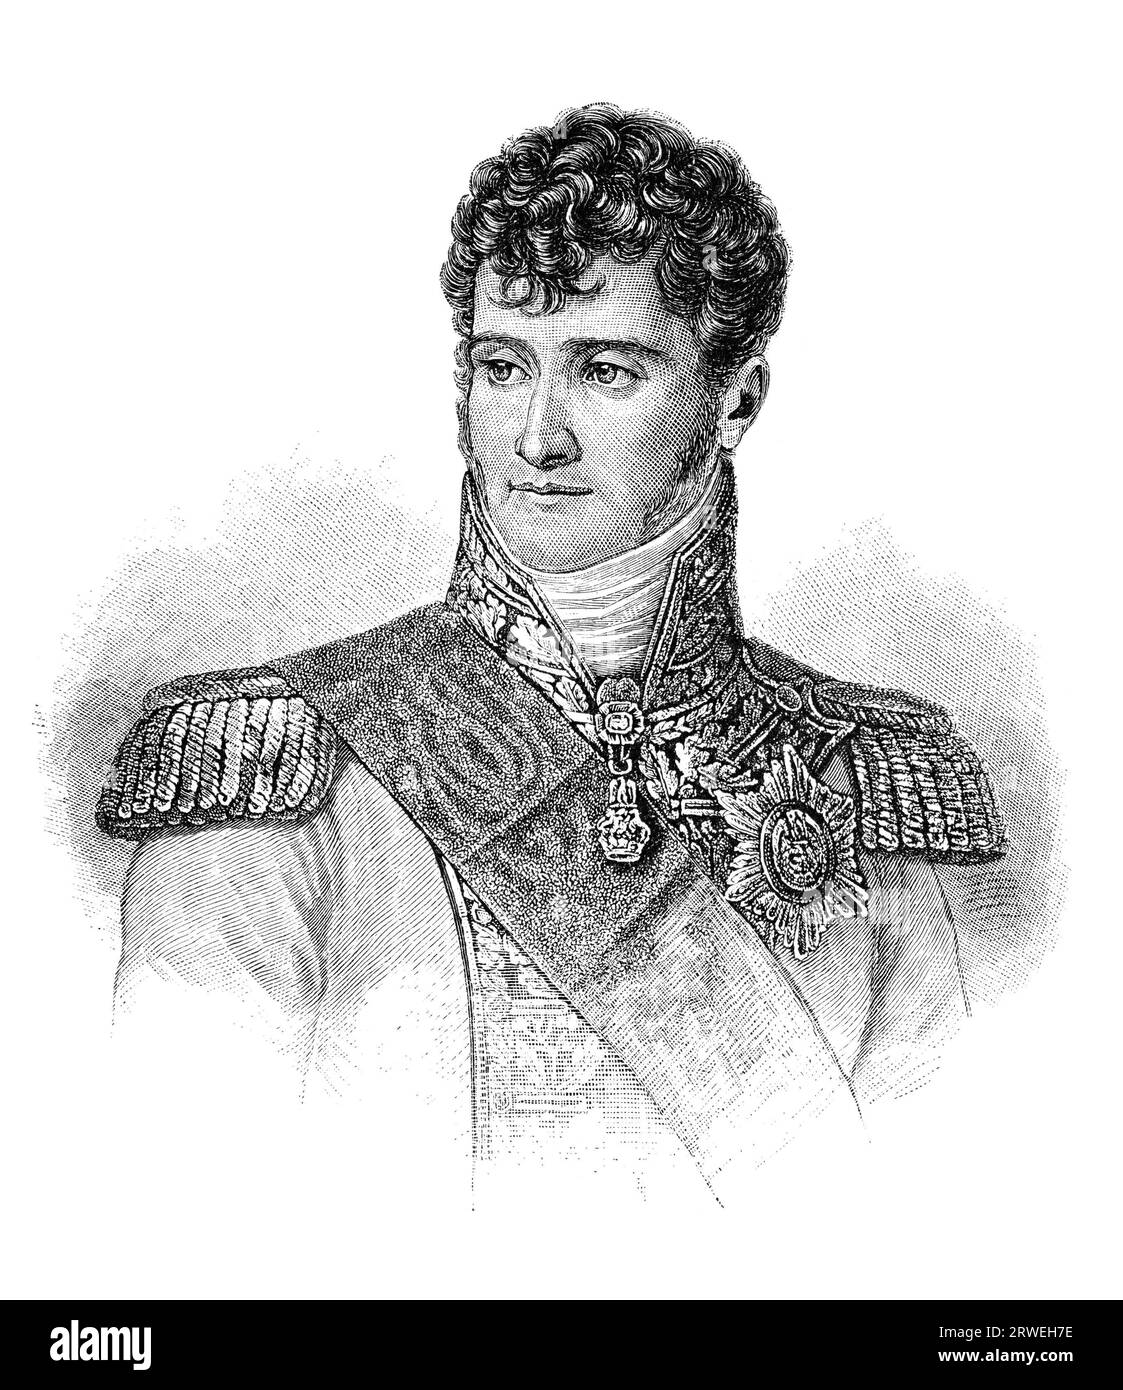 Jerome-Napoleon Bonaparte, French Prince, King of Westphalia, 1st Prince of Montfort (15 November 1784 ? 24 June 1860) was the youngest brother of Stock Photo